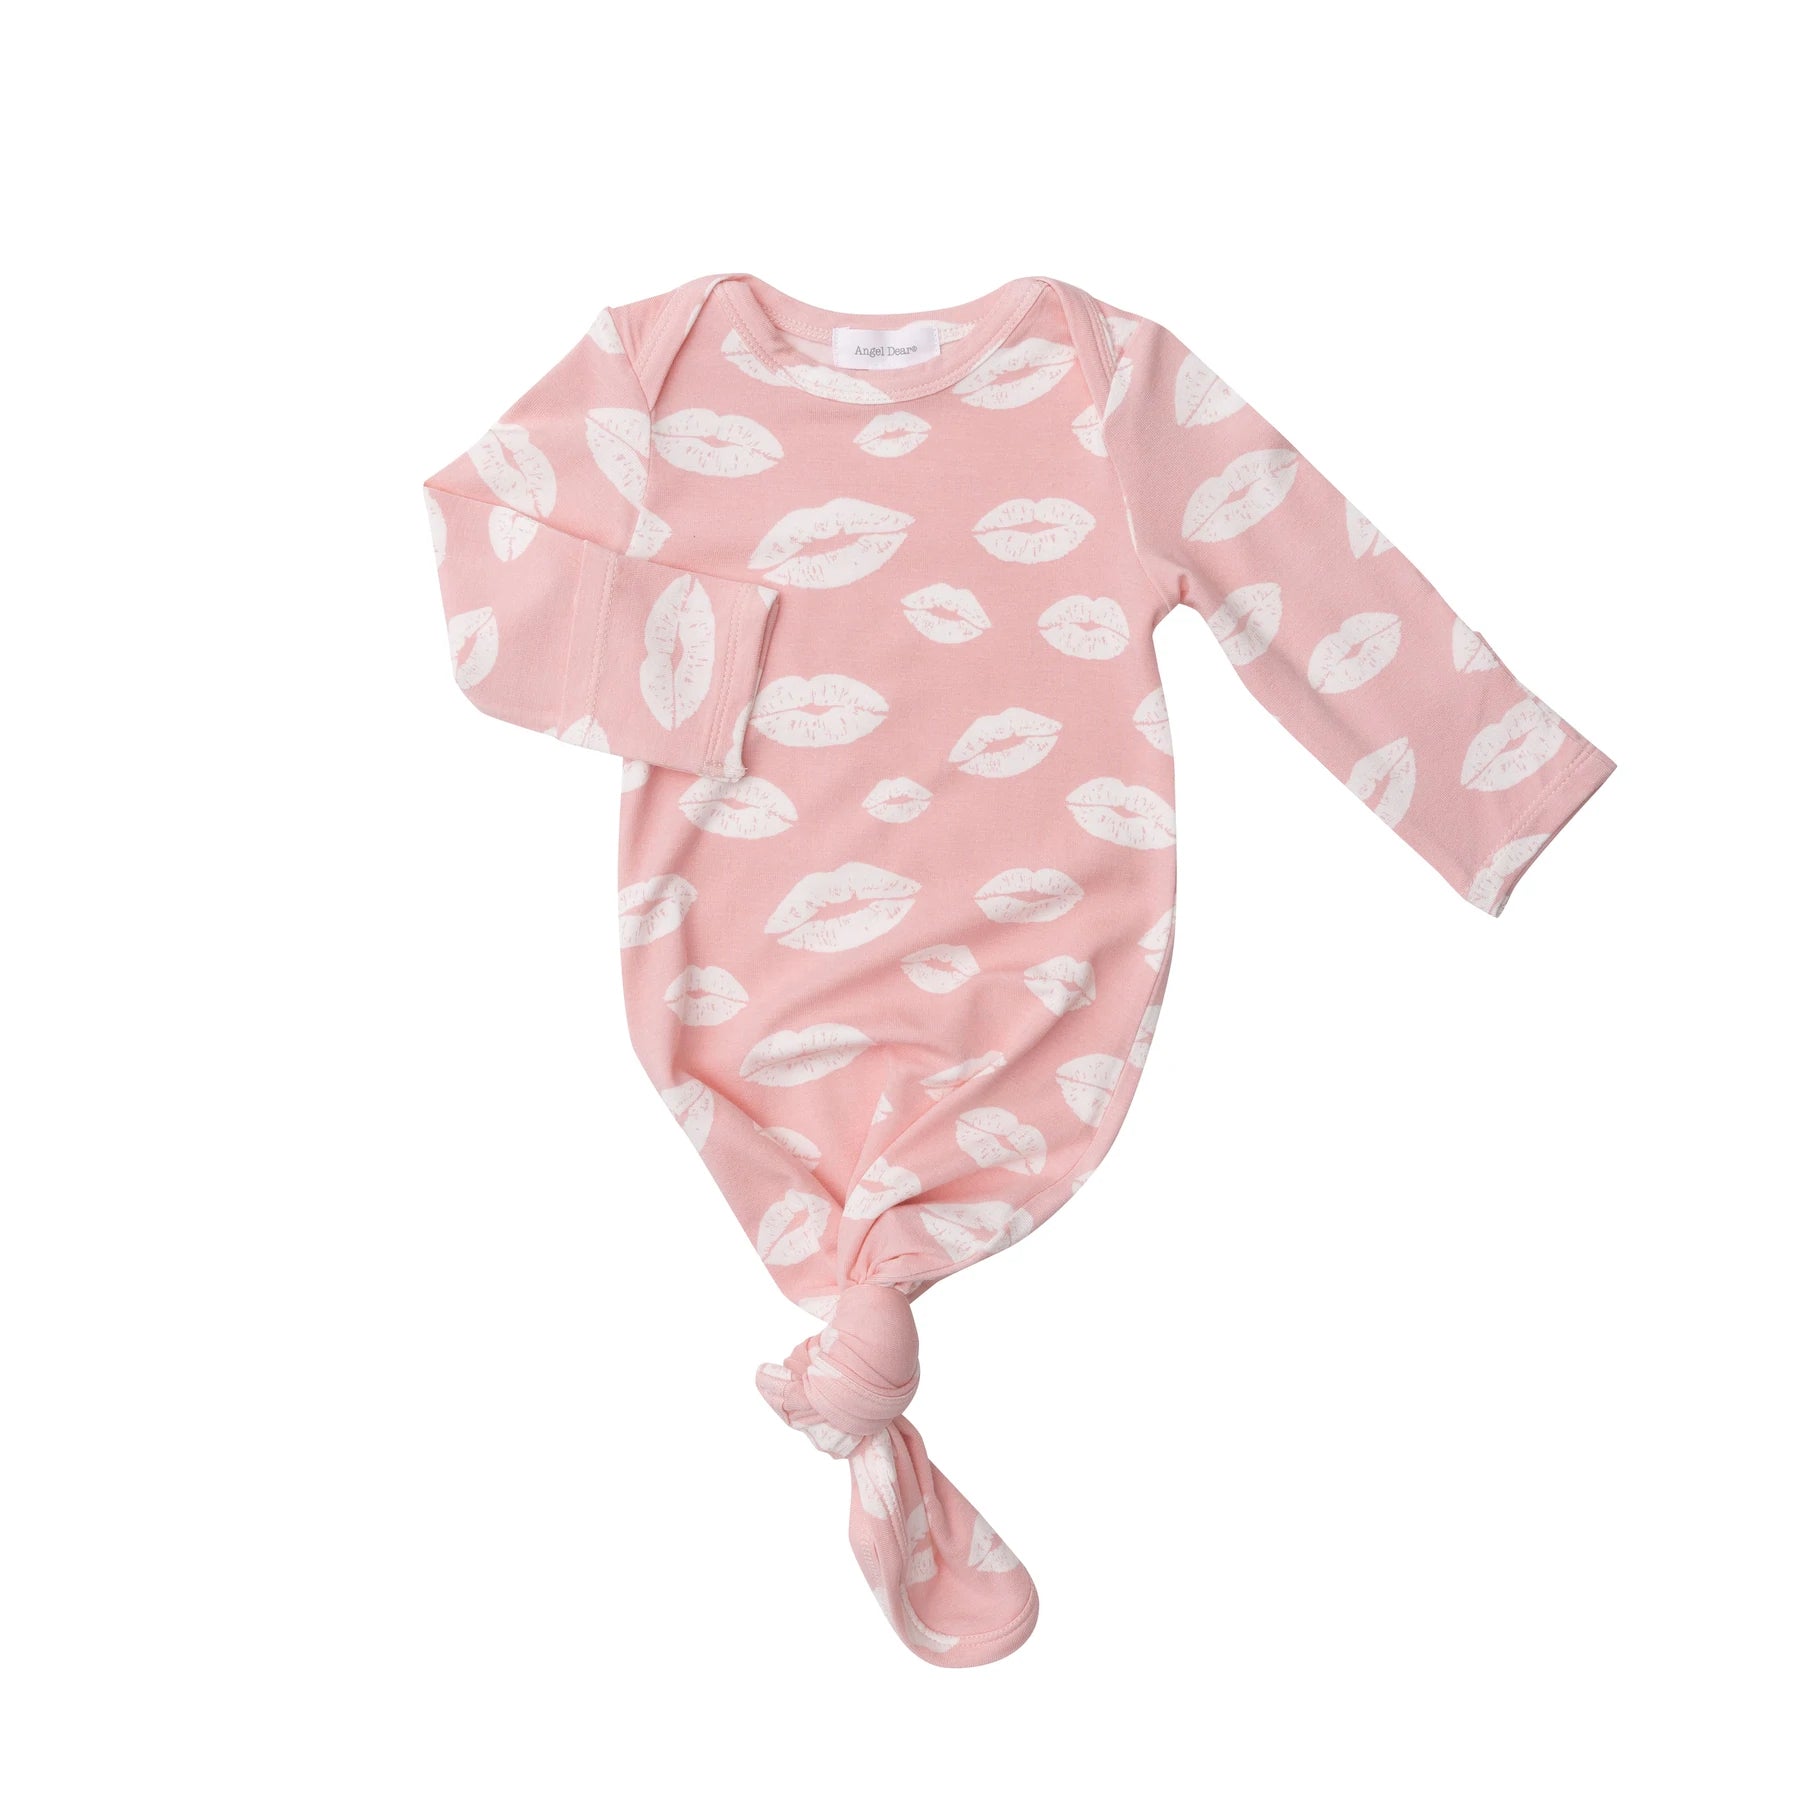 Knot Gown in Pink Kisses  - Doodlebug's Children's Boutique